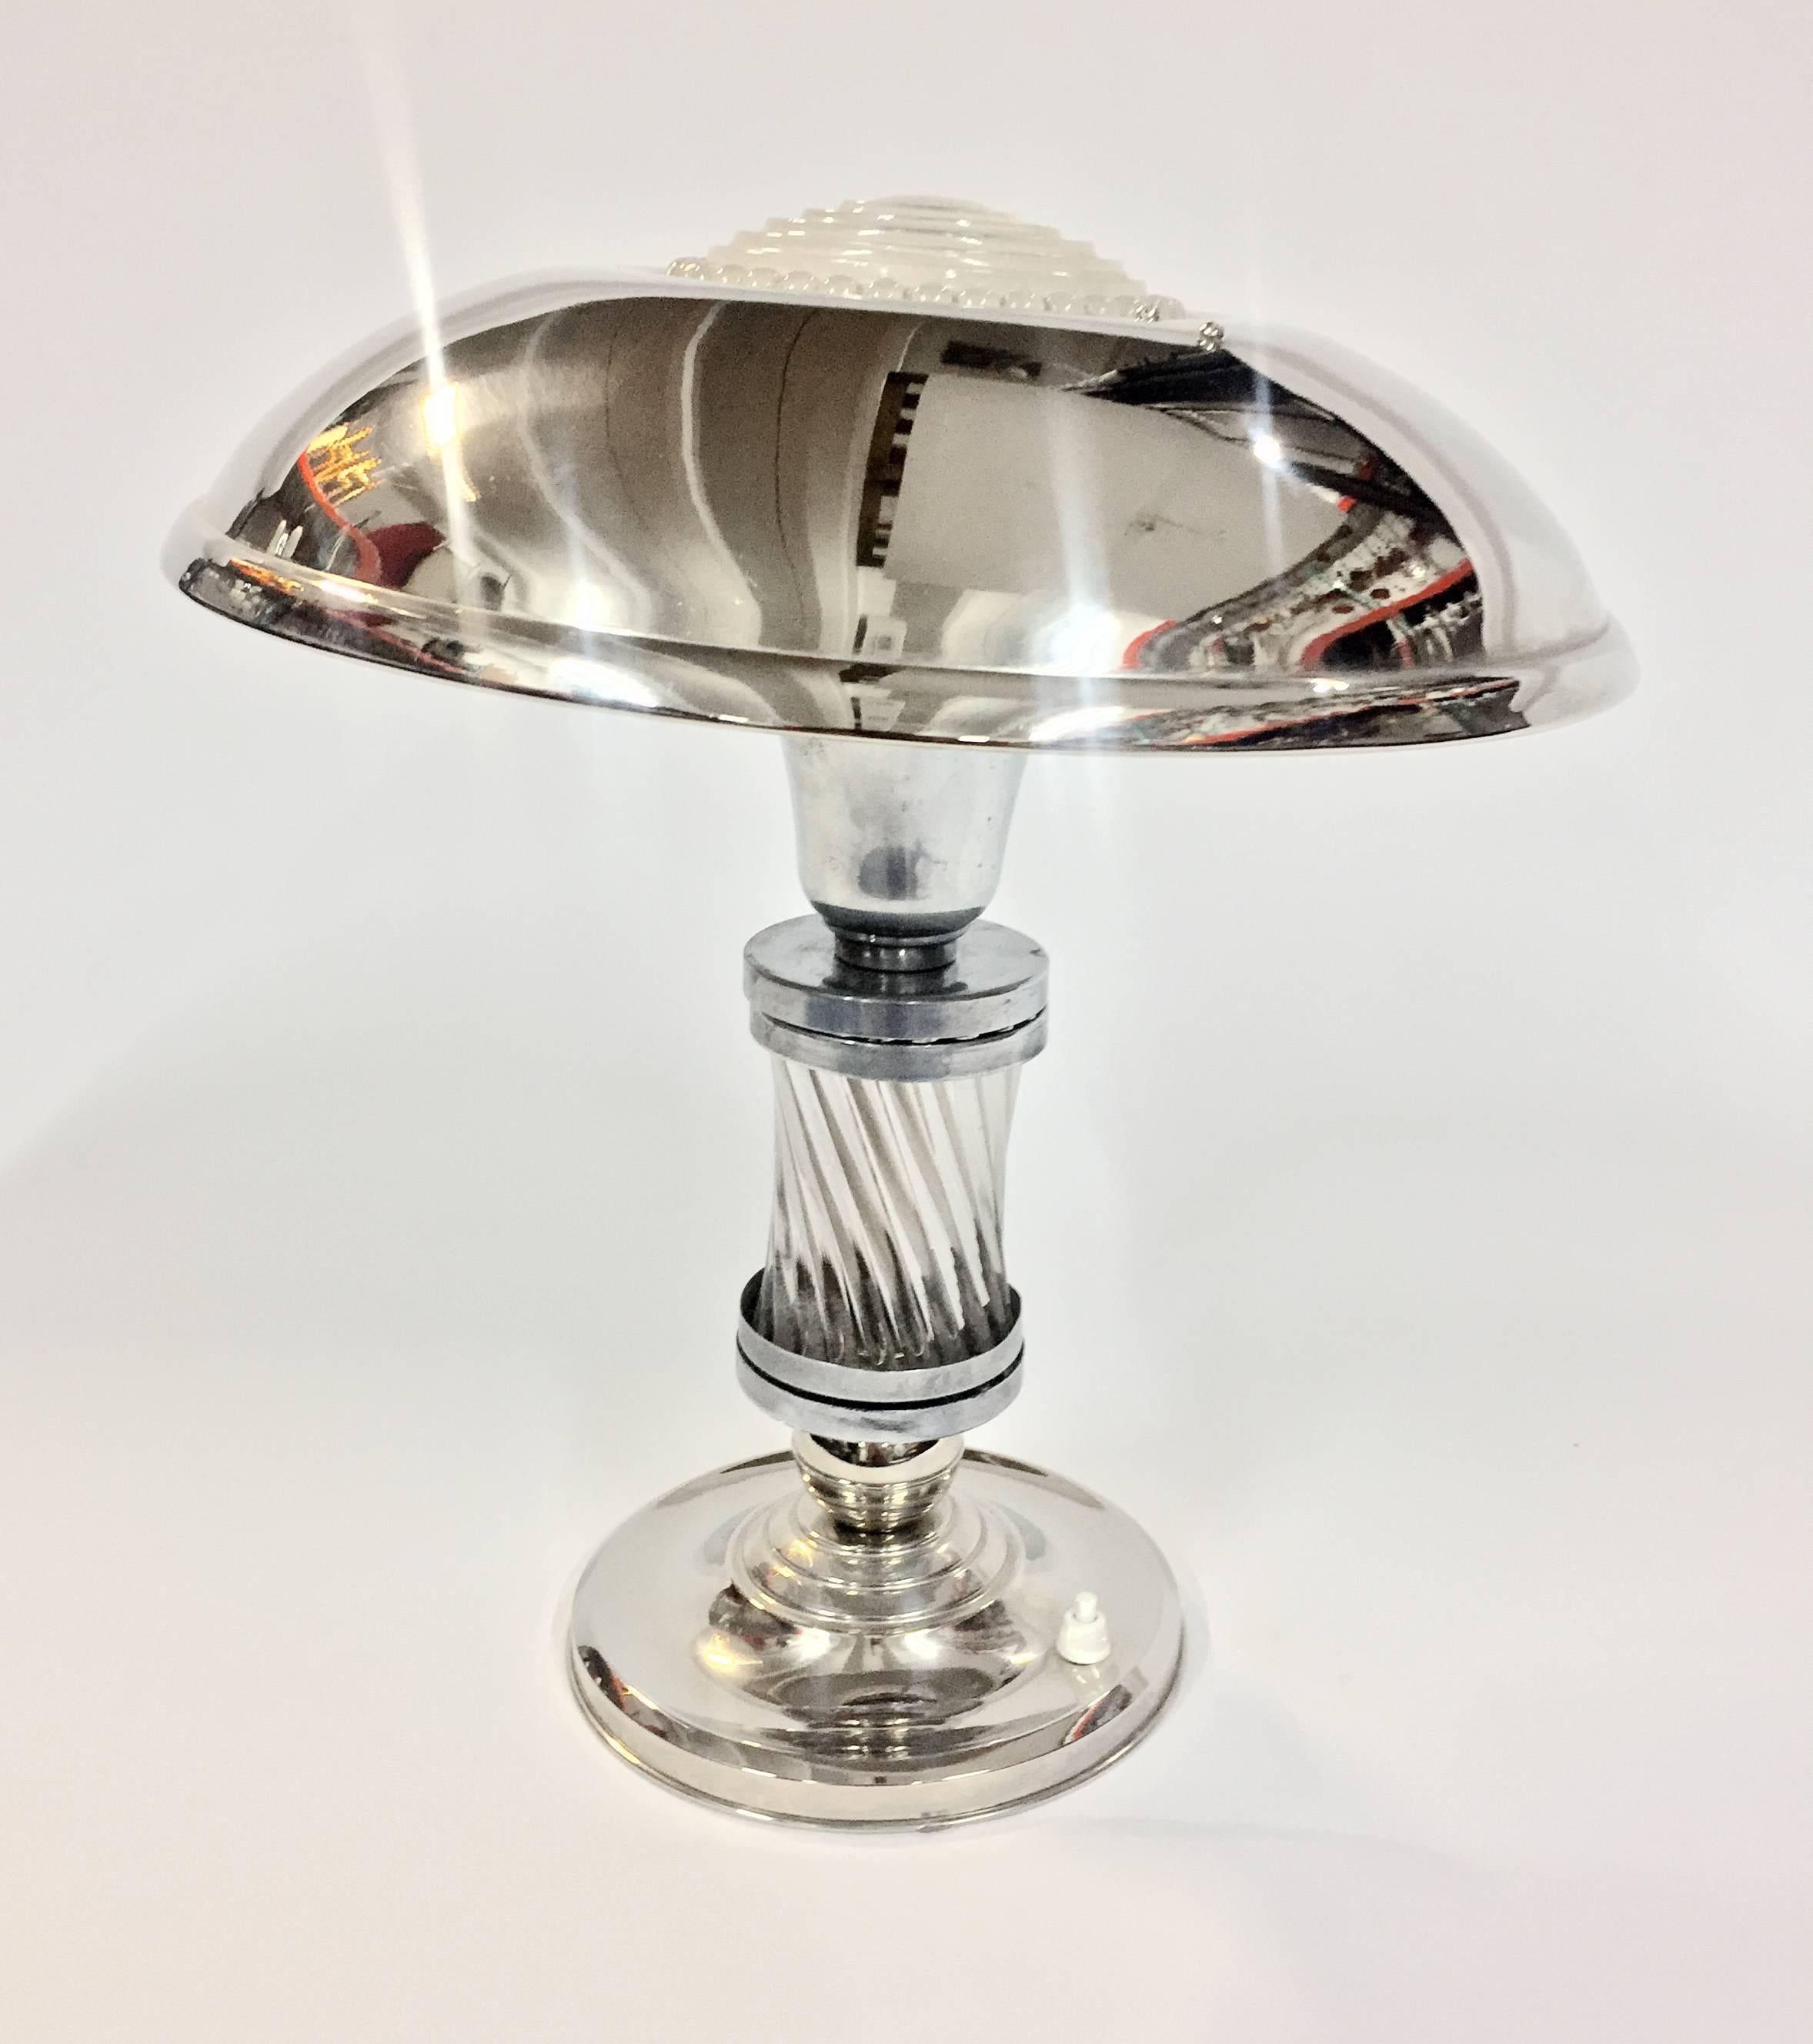 This luxe Art Deco table lamp, circa 1925 features a chrome-plated body with a silvered base and shade for a gorgeous contrast. Glass rods on the body and molded glass plate to top the shade. The shade swivels for convenience. Iconic Art Deco design